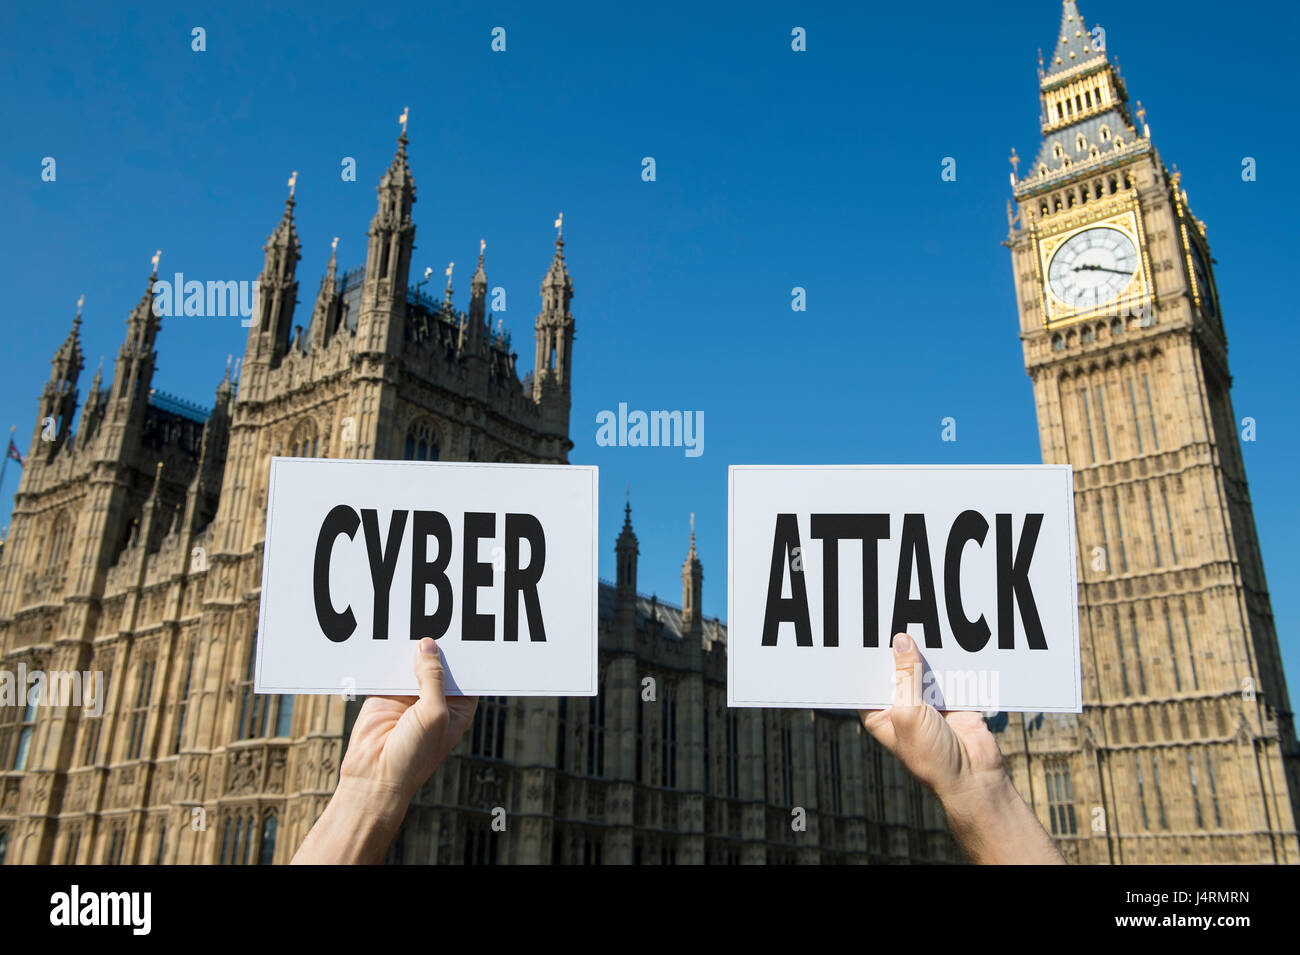 Hands holding election signs protesting a computer cyber attack outside the Houses of Parliament at Westminster Palace in London, UK Stock Photo